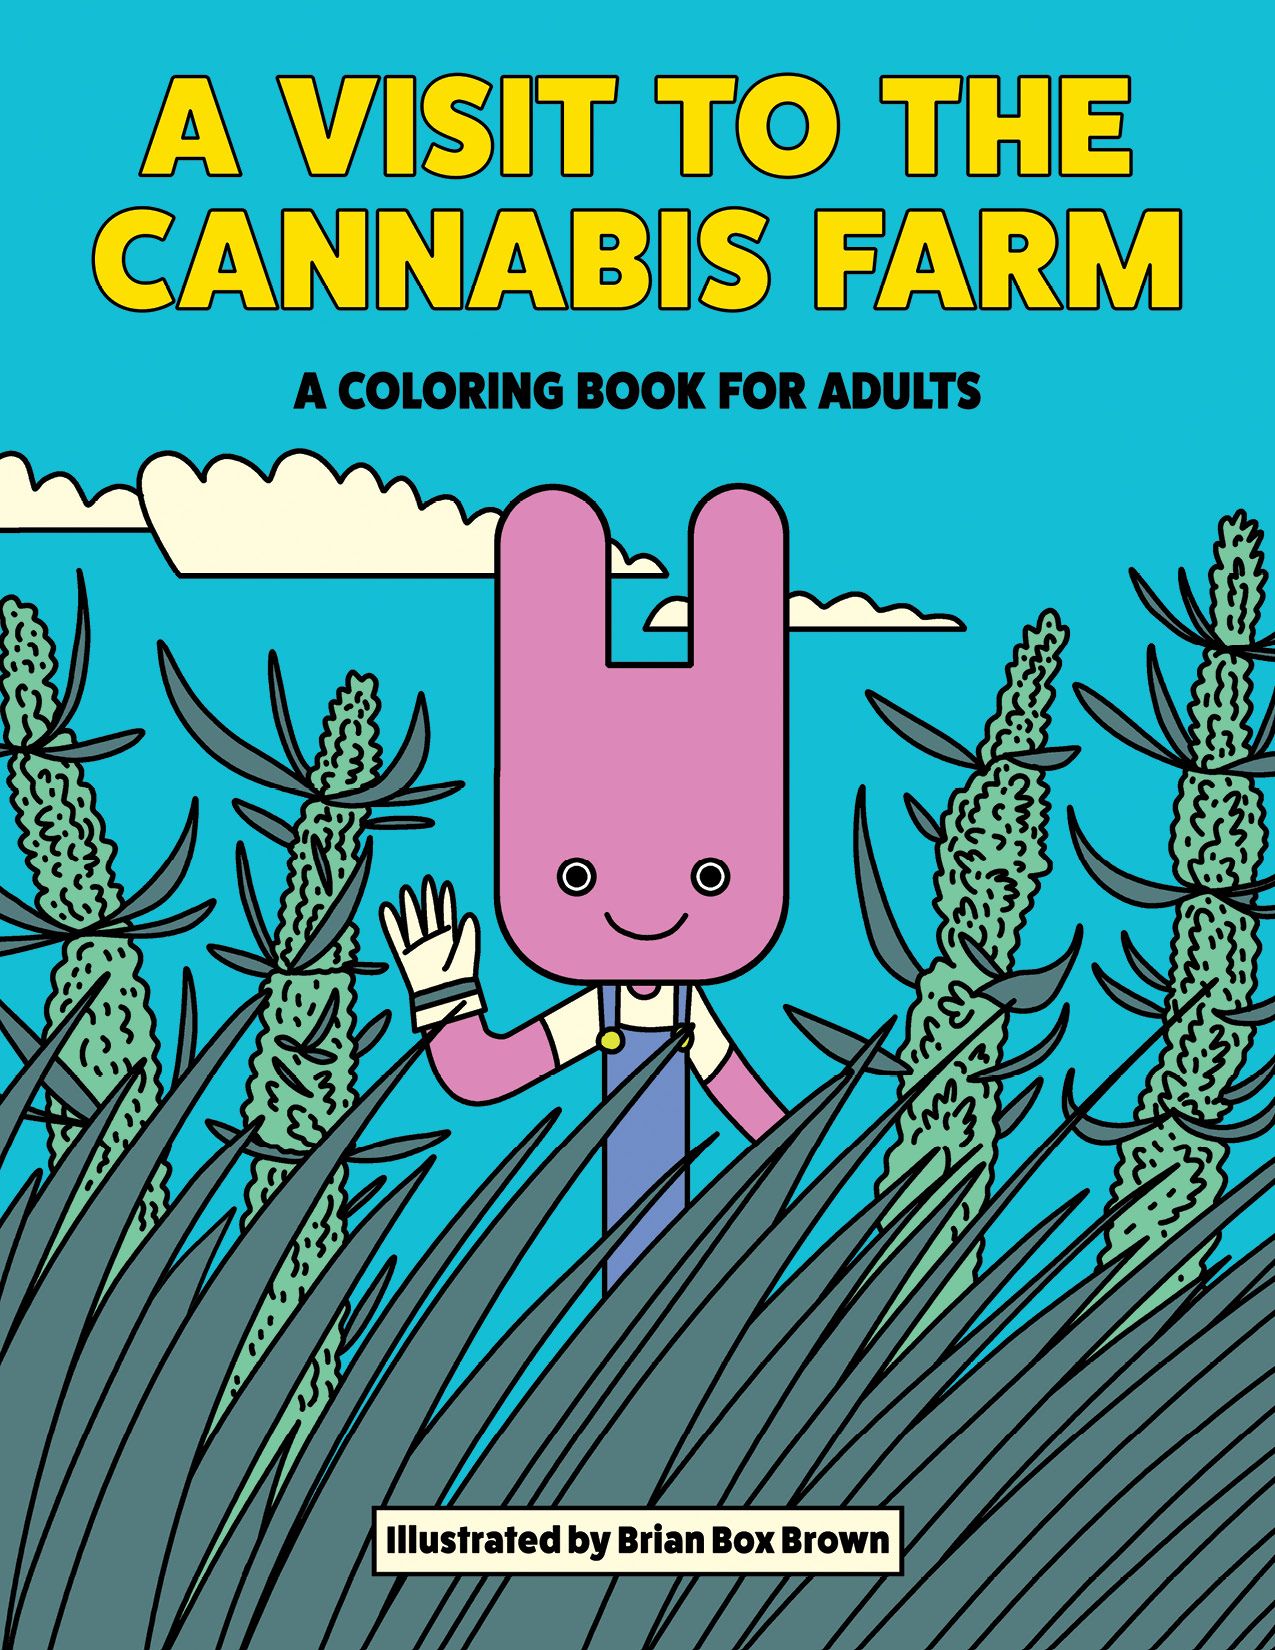 A VISIT TO THE CANNABIS FARM COLORING BOOK (NET)